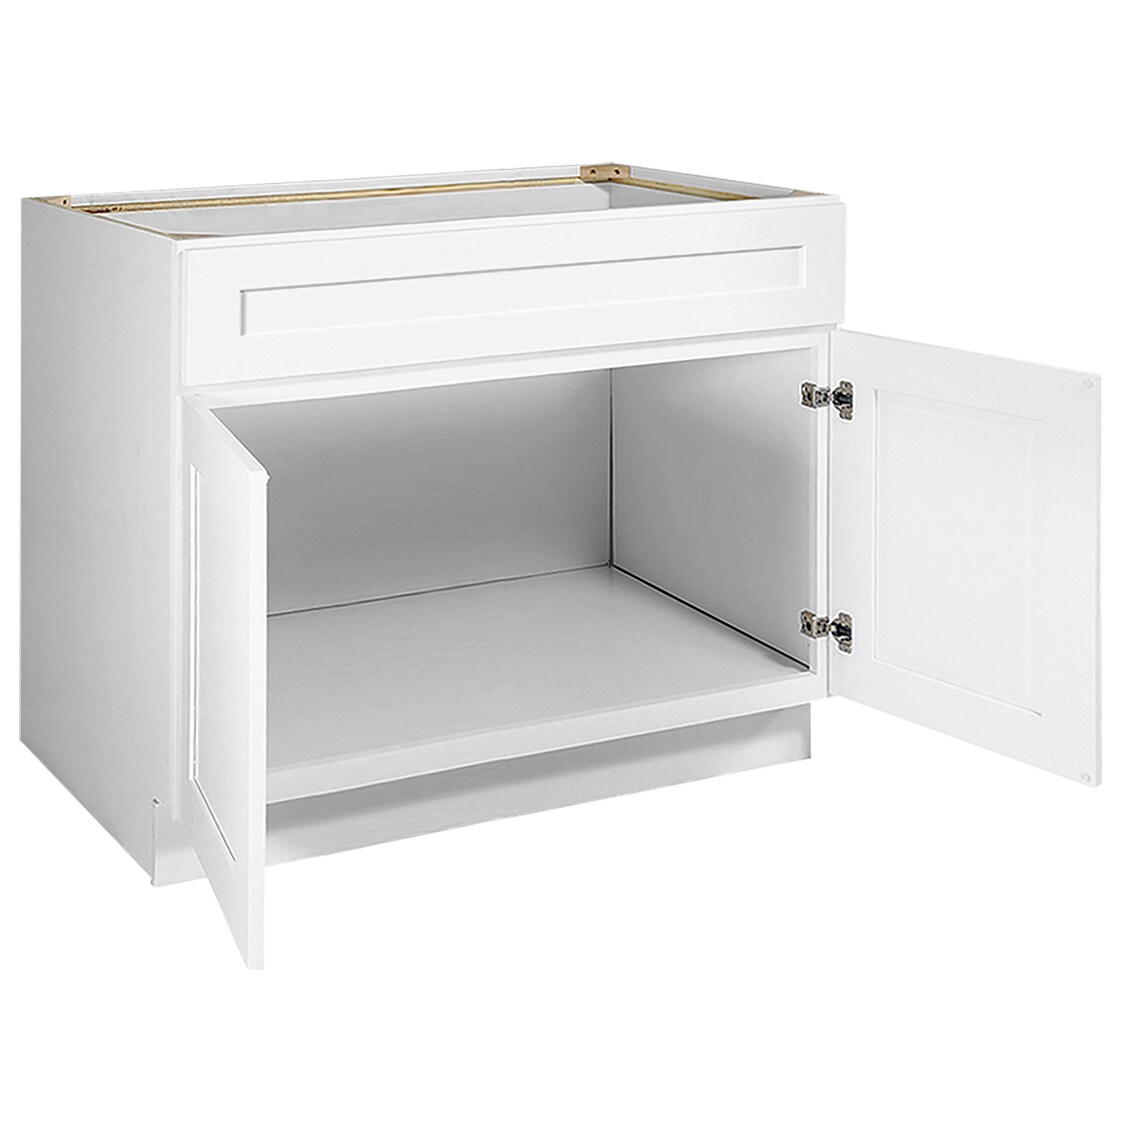 Brookings Base Kitchen Cabinet White 33 Inch by 34.5 Inch by 24